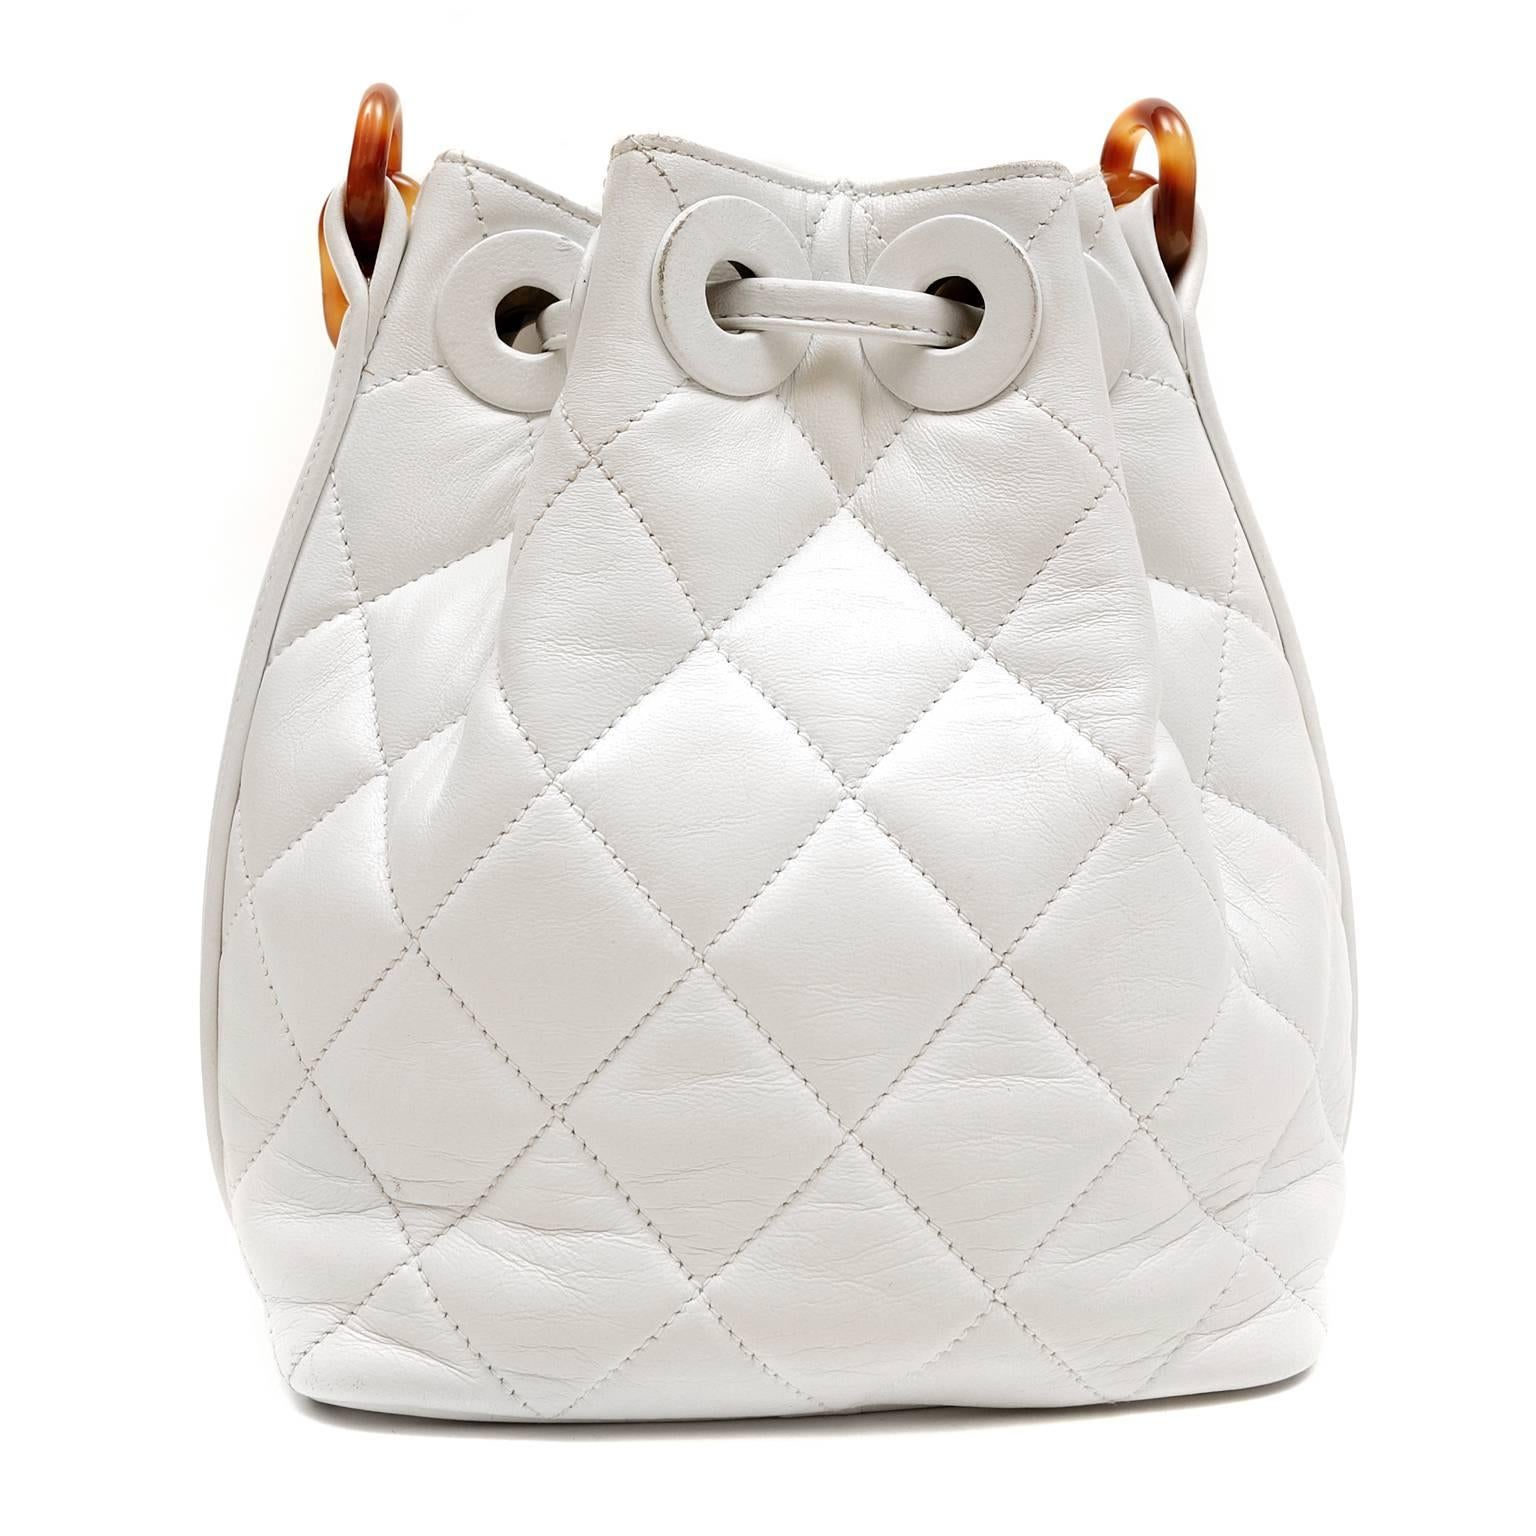 Chanel White Lambskin and Tortoise Chain Small Bucket Bag- Nearly Pristine condition
 
 Starkly contrasting colors and textures make this small cross body incredibly unique and collectible.   

White lambskin drawstring bag is quilted in